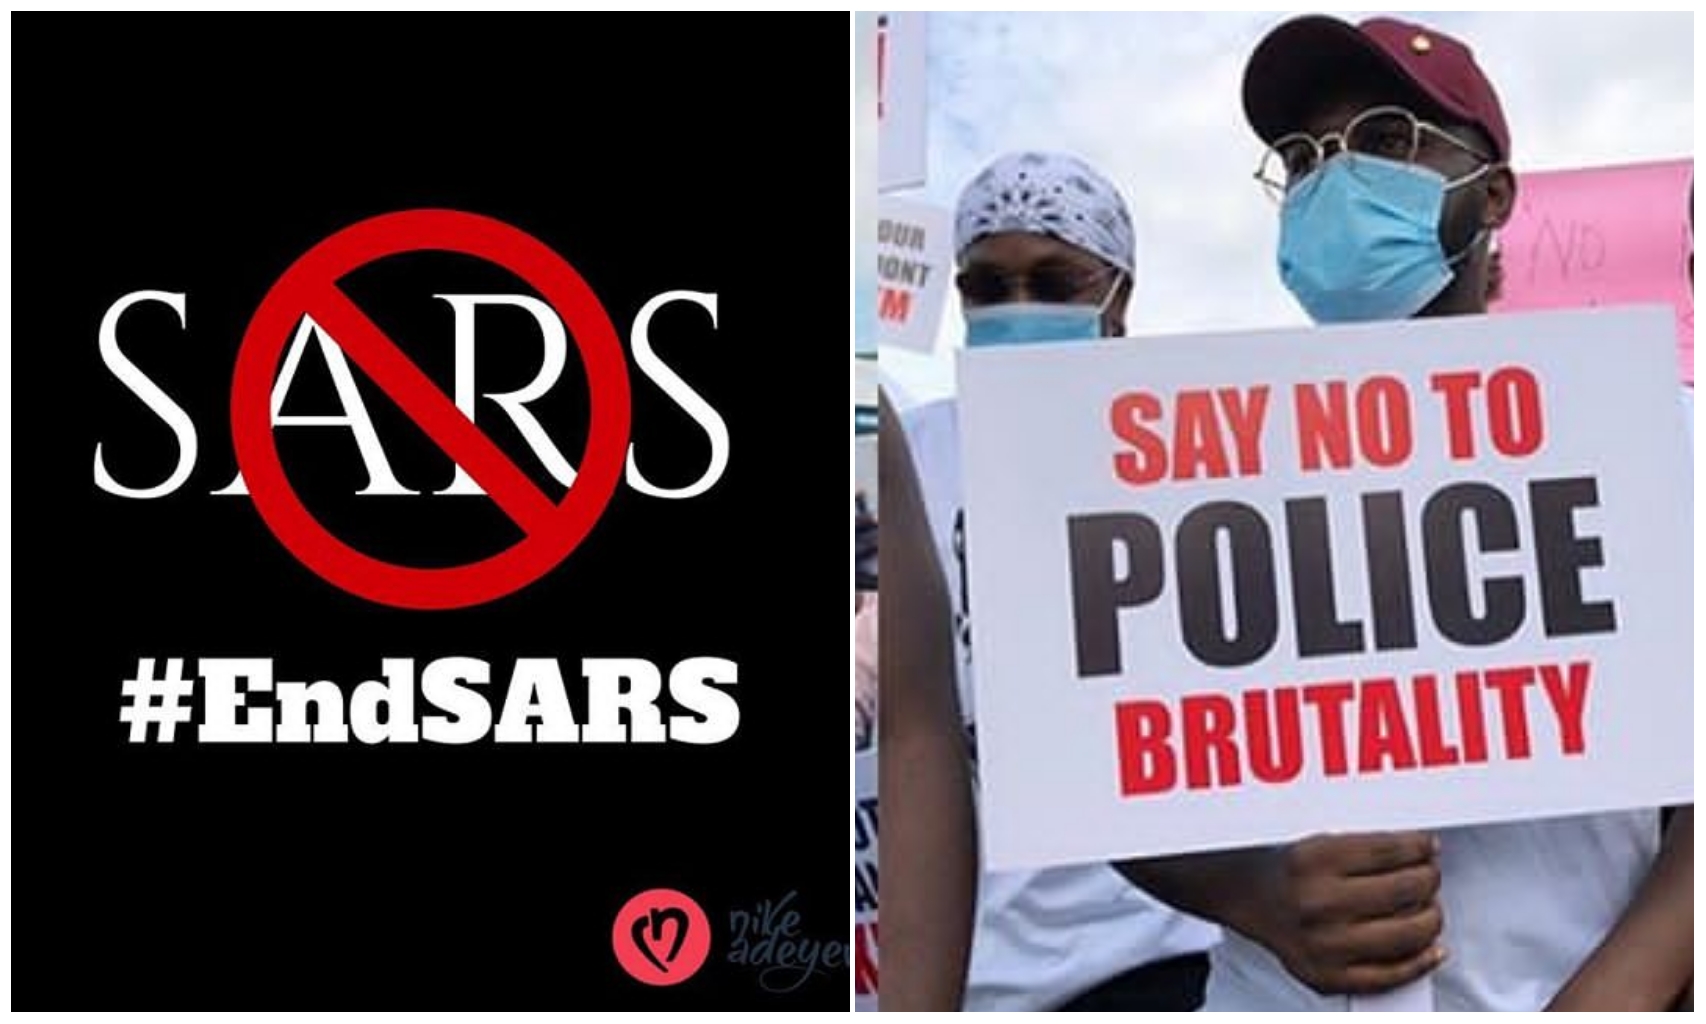 Voice of the masses triumphs as #EndSARS trends in England and US